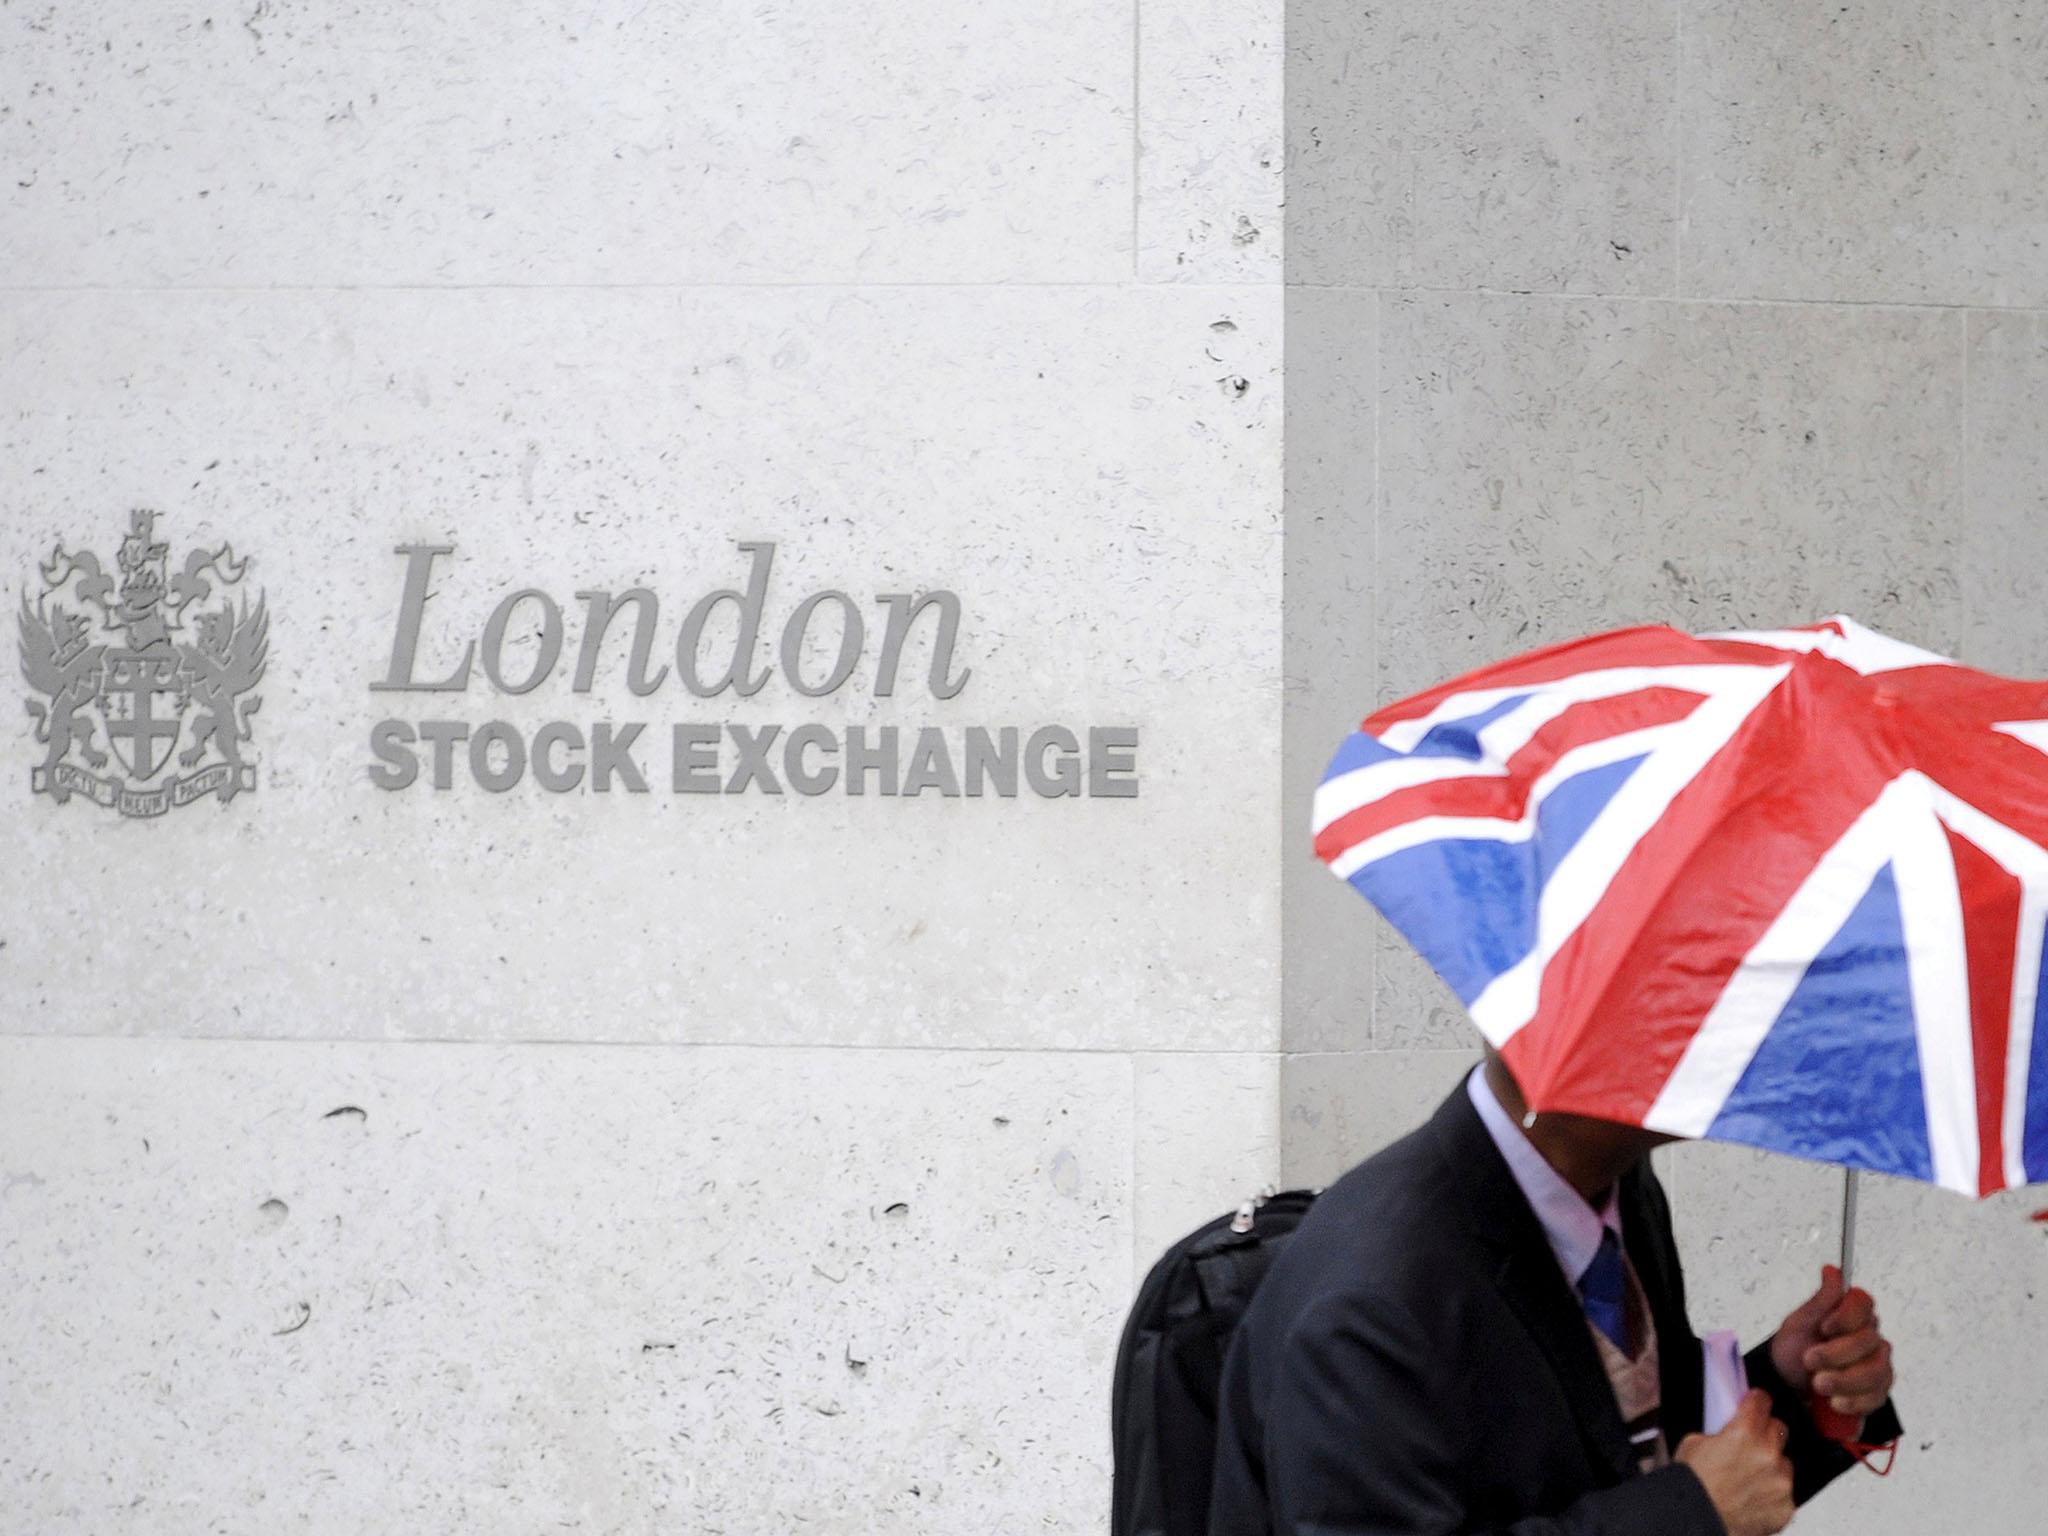 A worker shelters from the rain as he passes the London Stock Exchange in the City of London at lunchtime